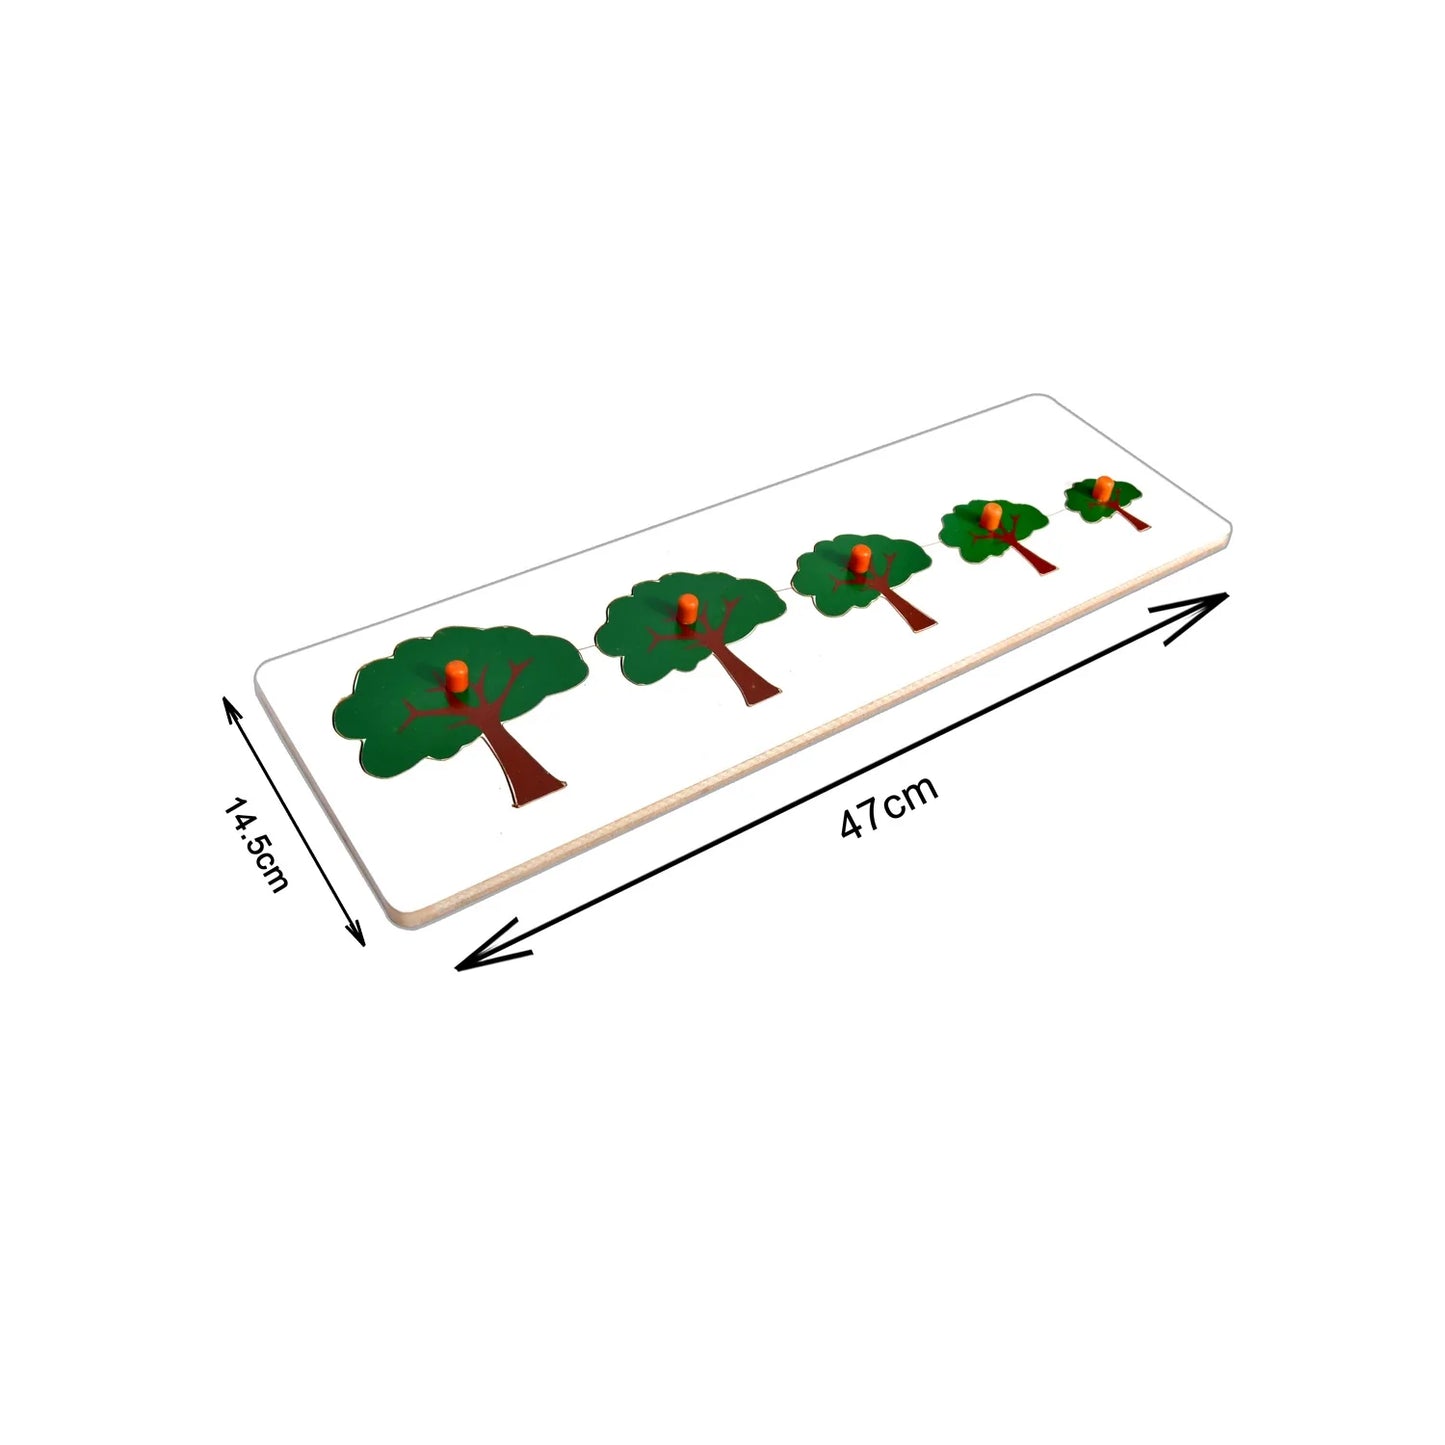 Montessori Size Variation Inset Learning Board - Tree